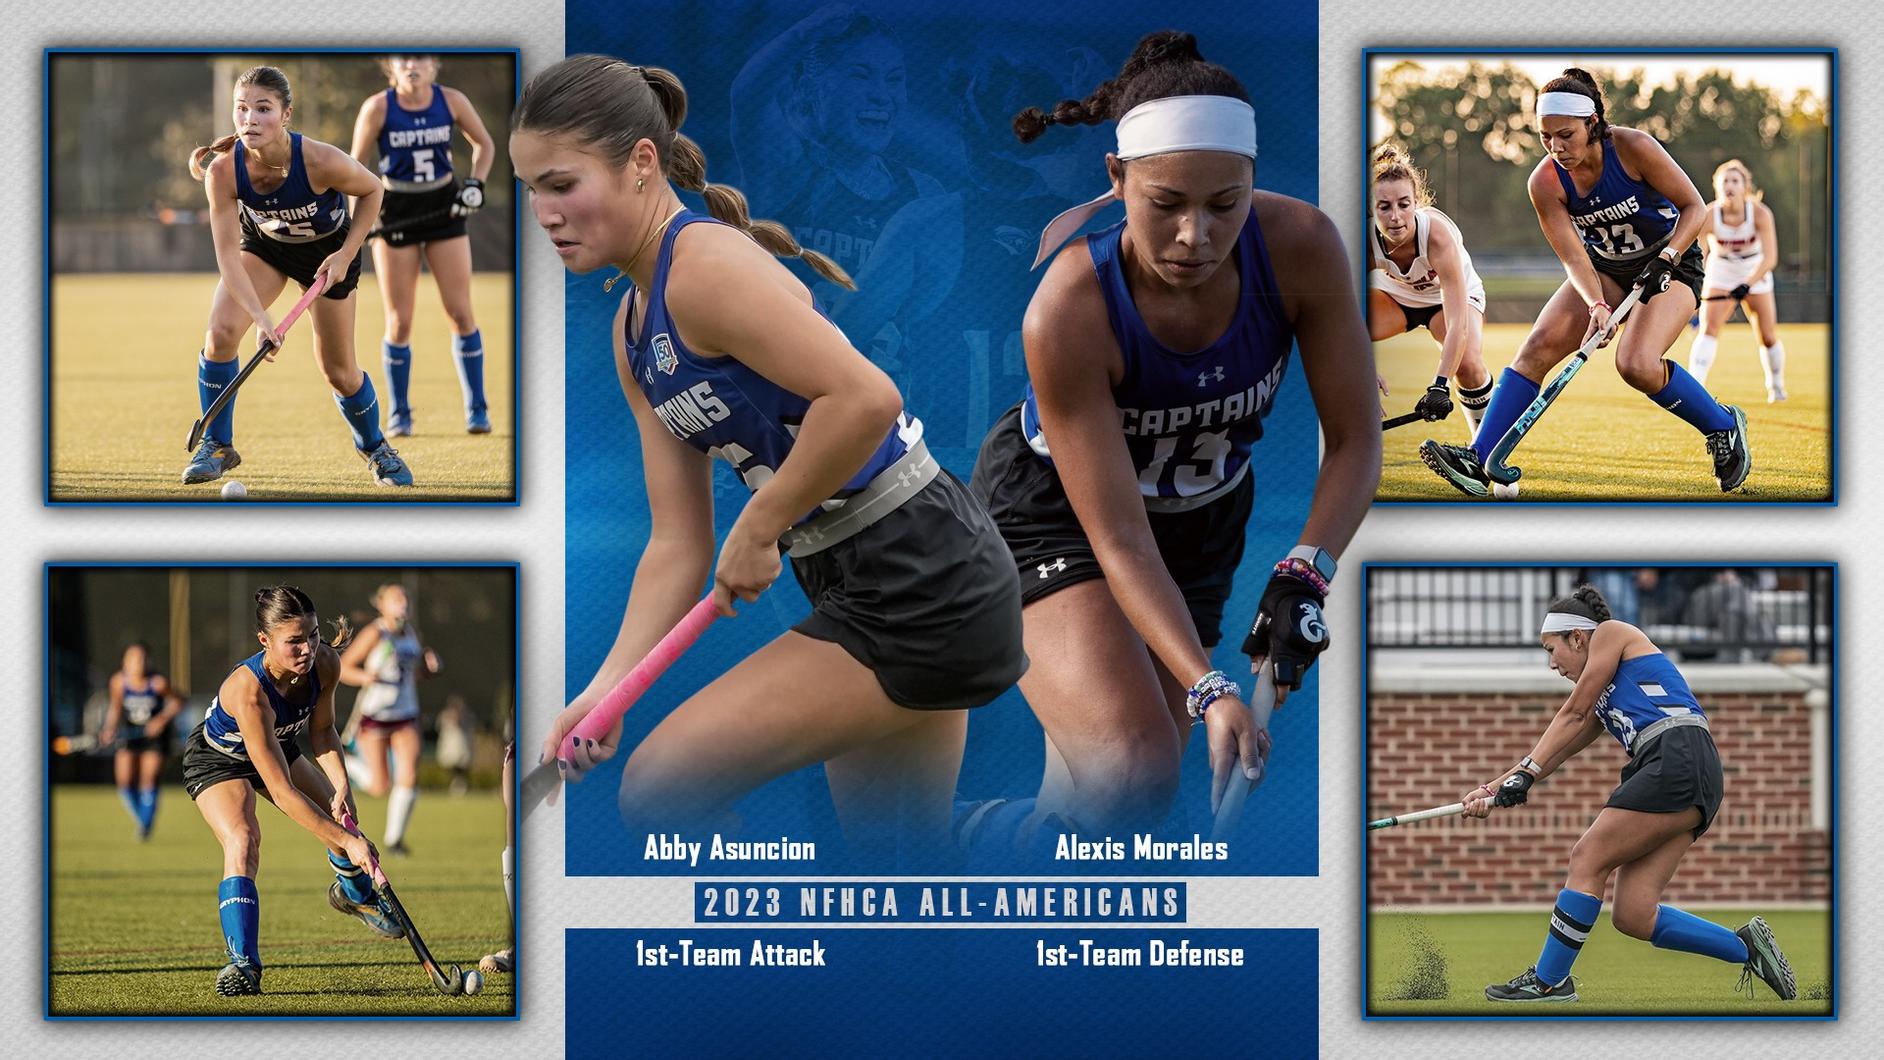 CNU's Abby Asuncion and Alexis Morales Collect First-Team NFHCA All-American Accolades